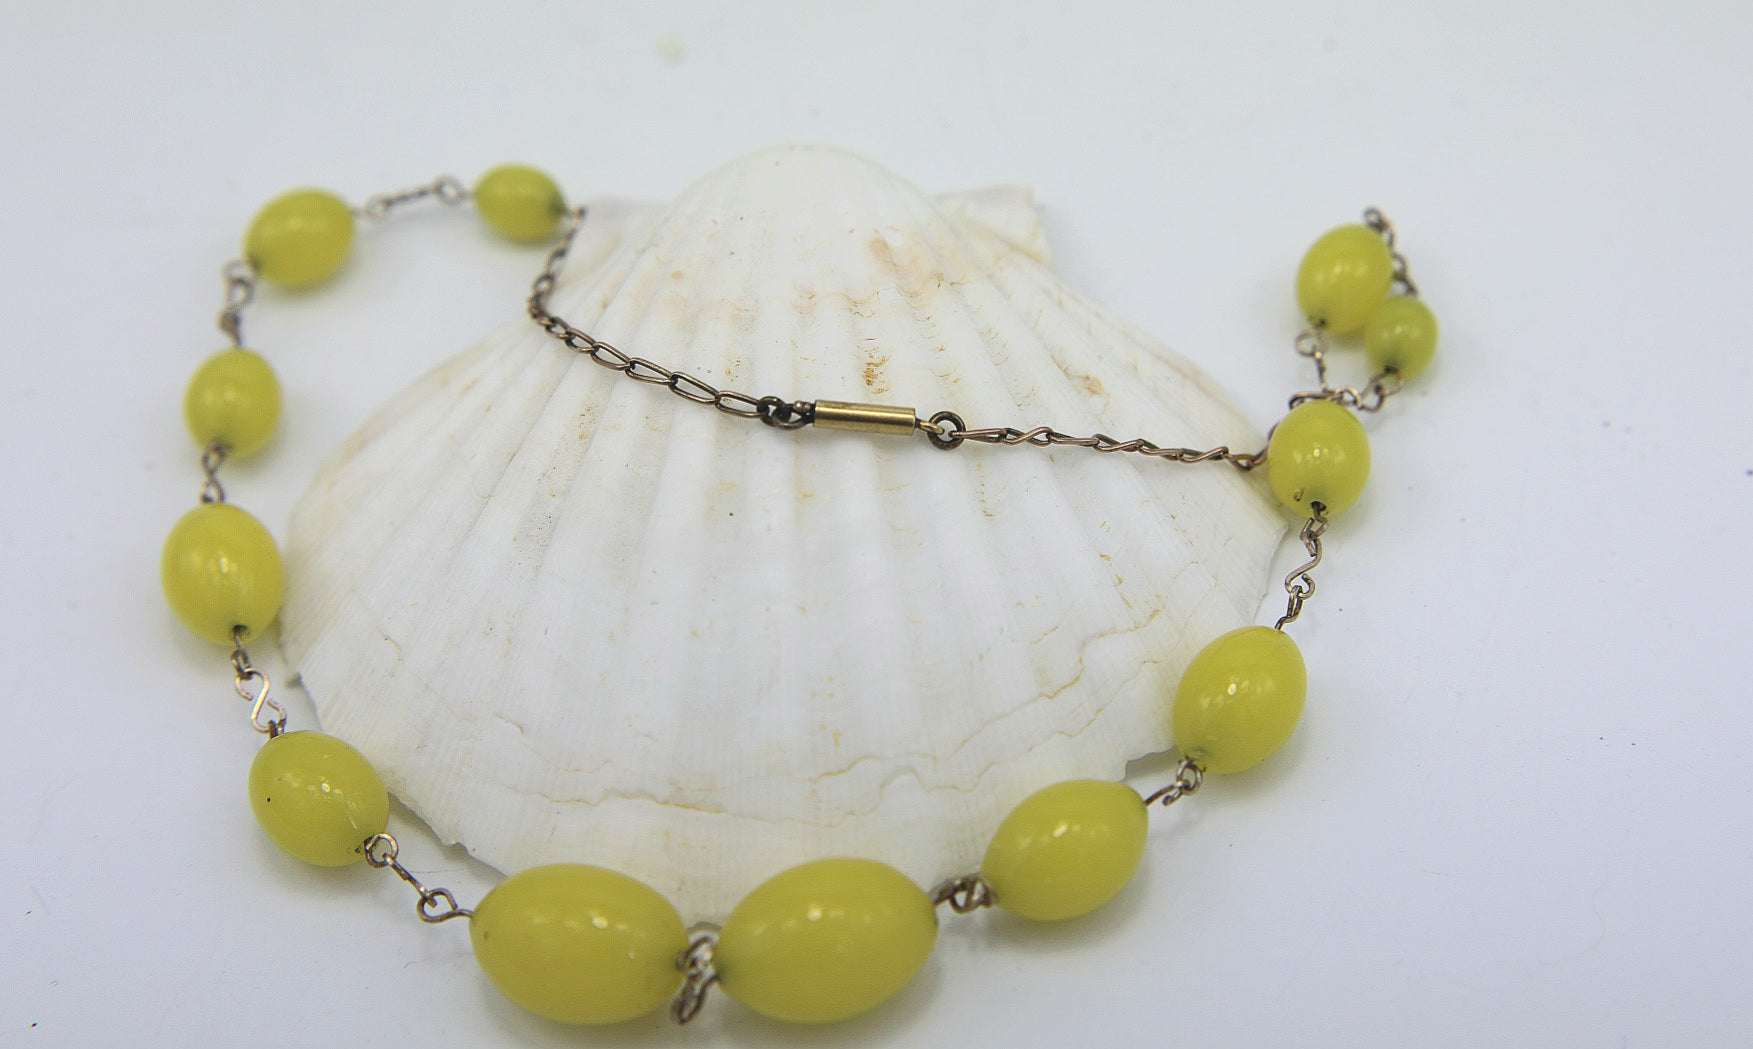 1930s glass necklace - Moulded Graduating beads - yellow statement